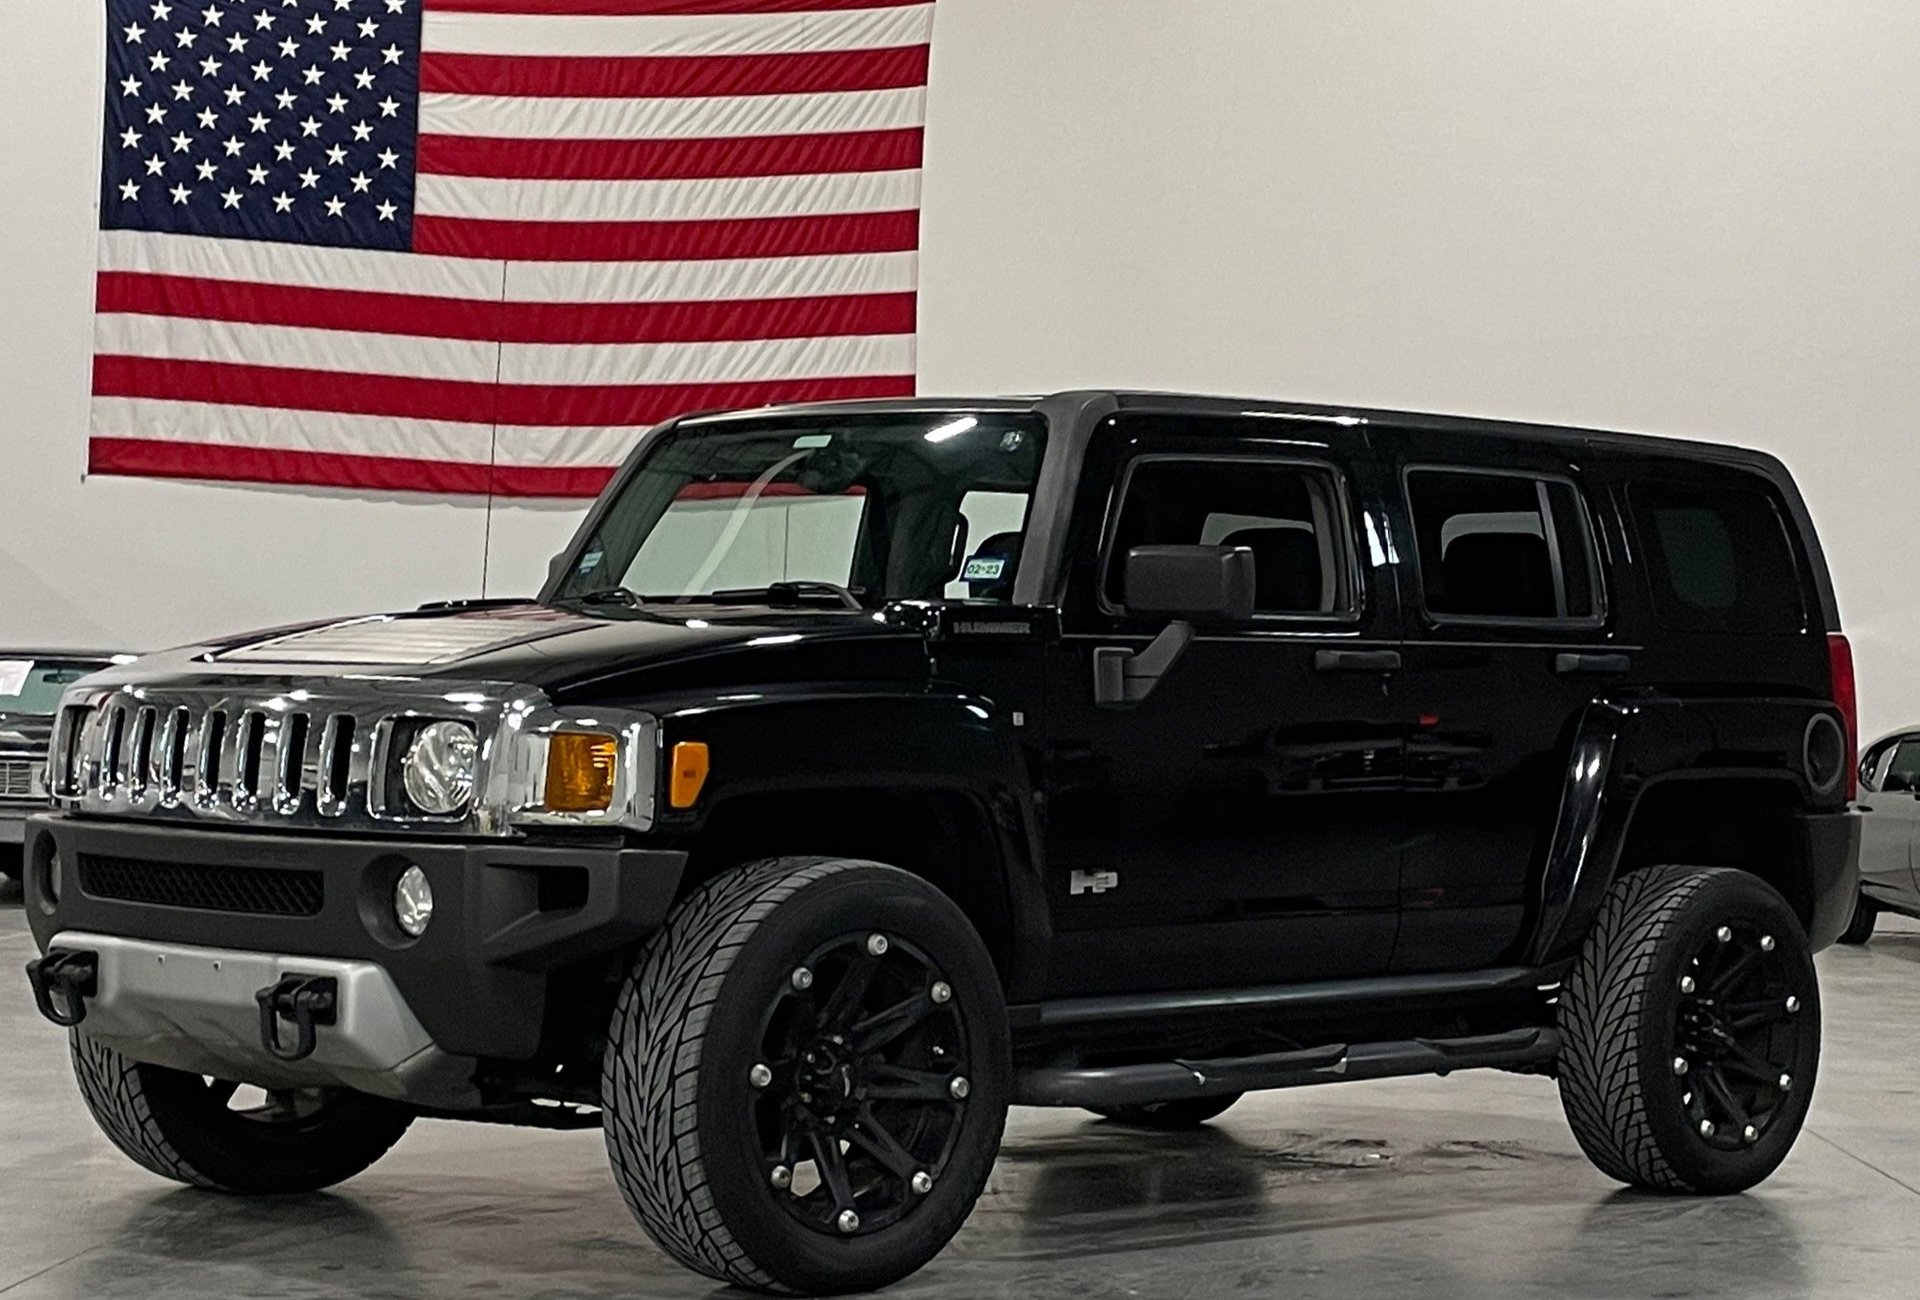 2008 Hummer H3 | GR Auto Gallery